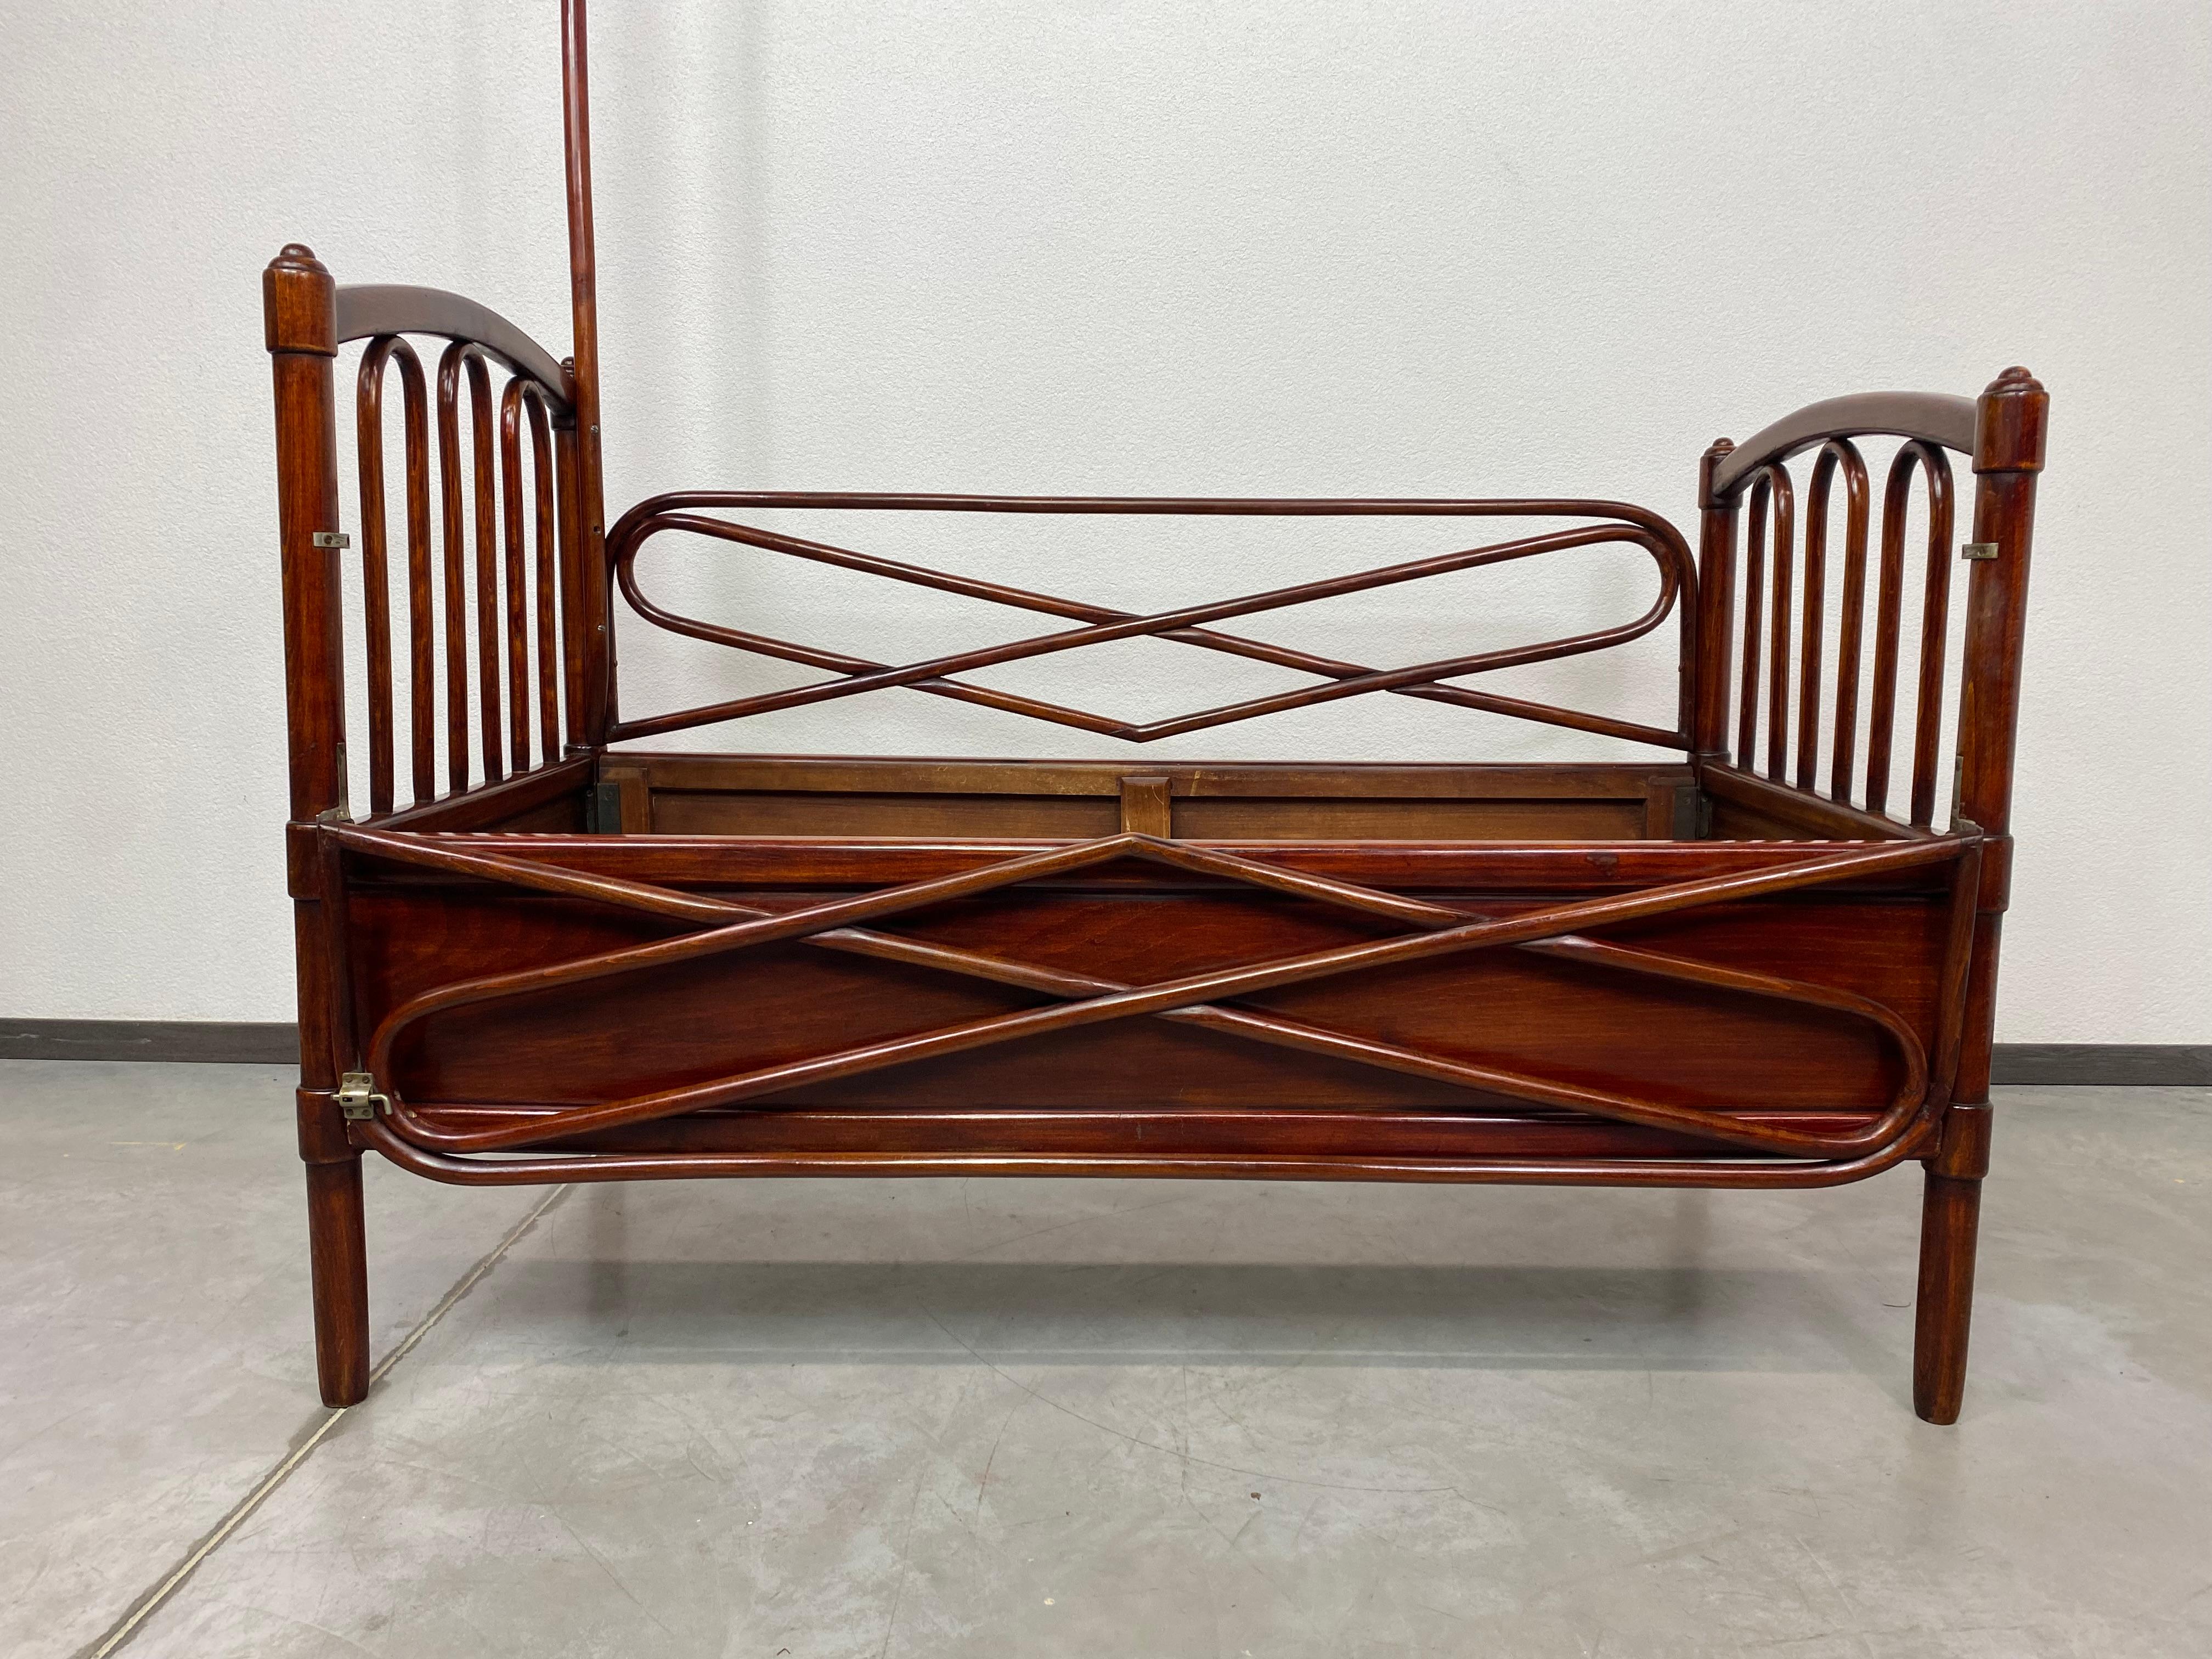 Bentwood bed no.5 for children circa 1890 in very good original condition.